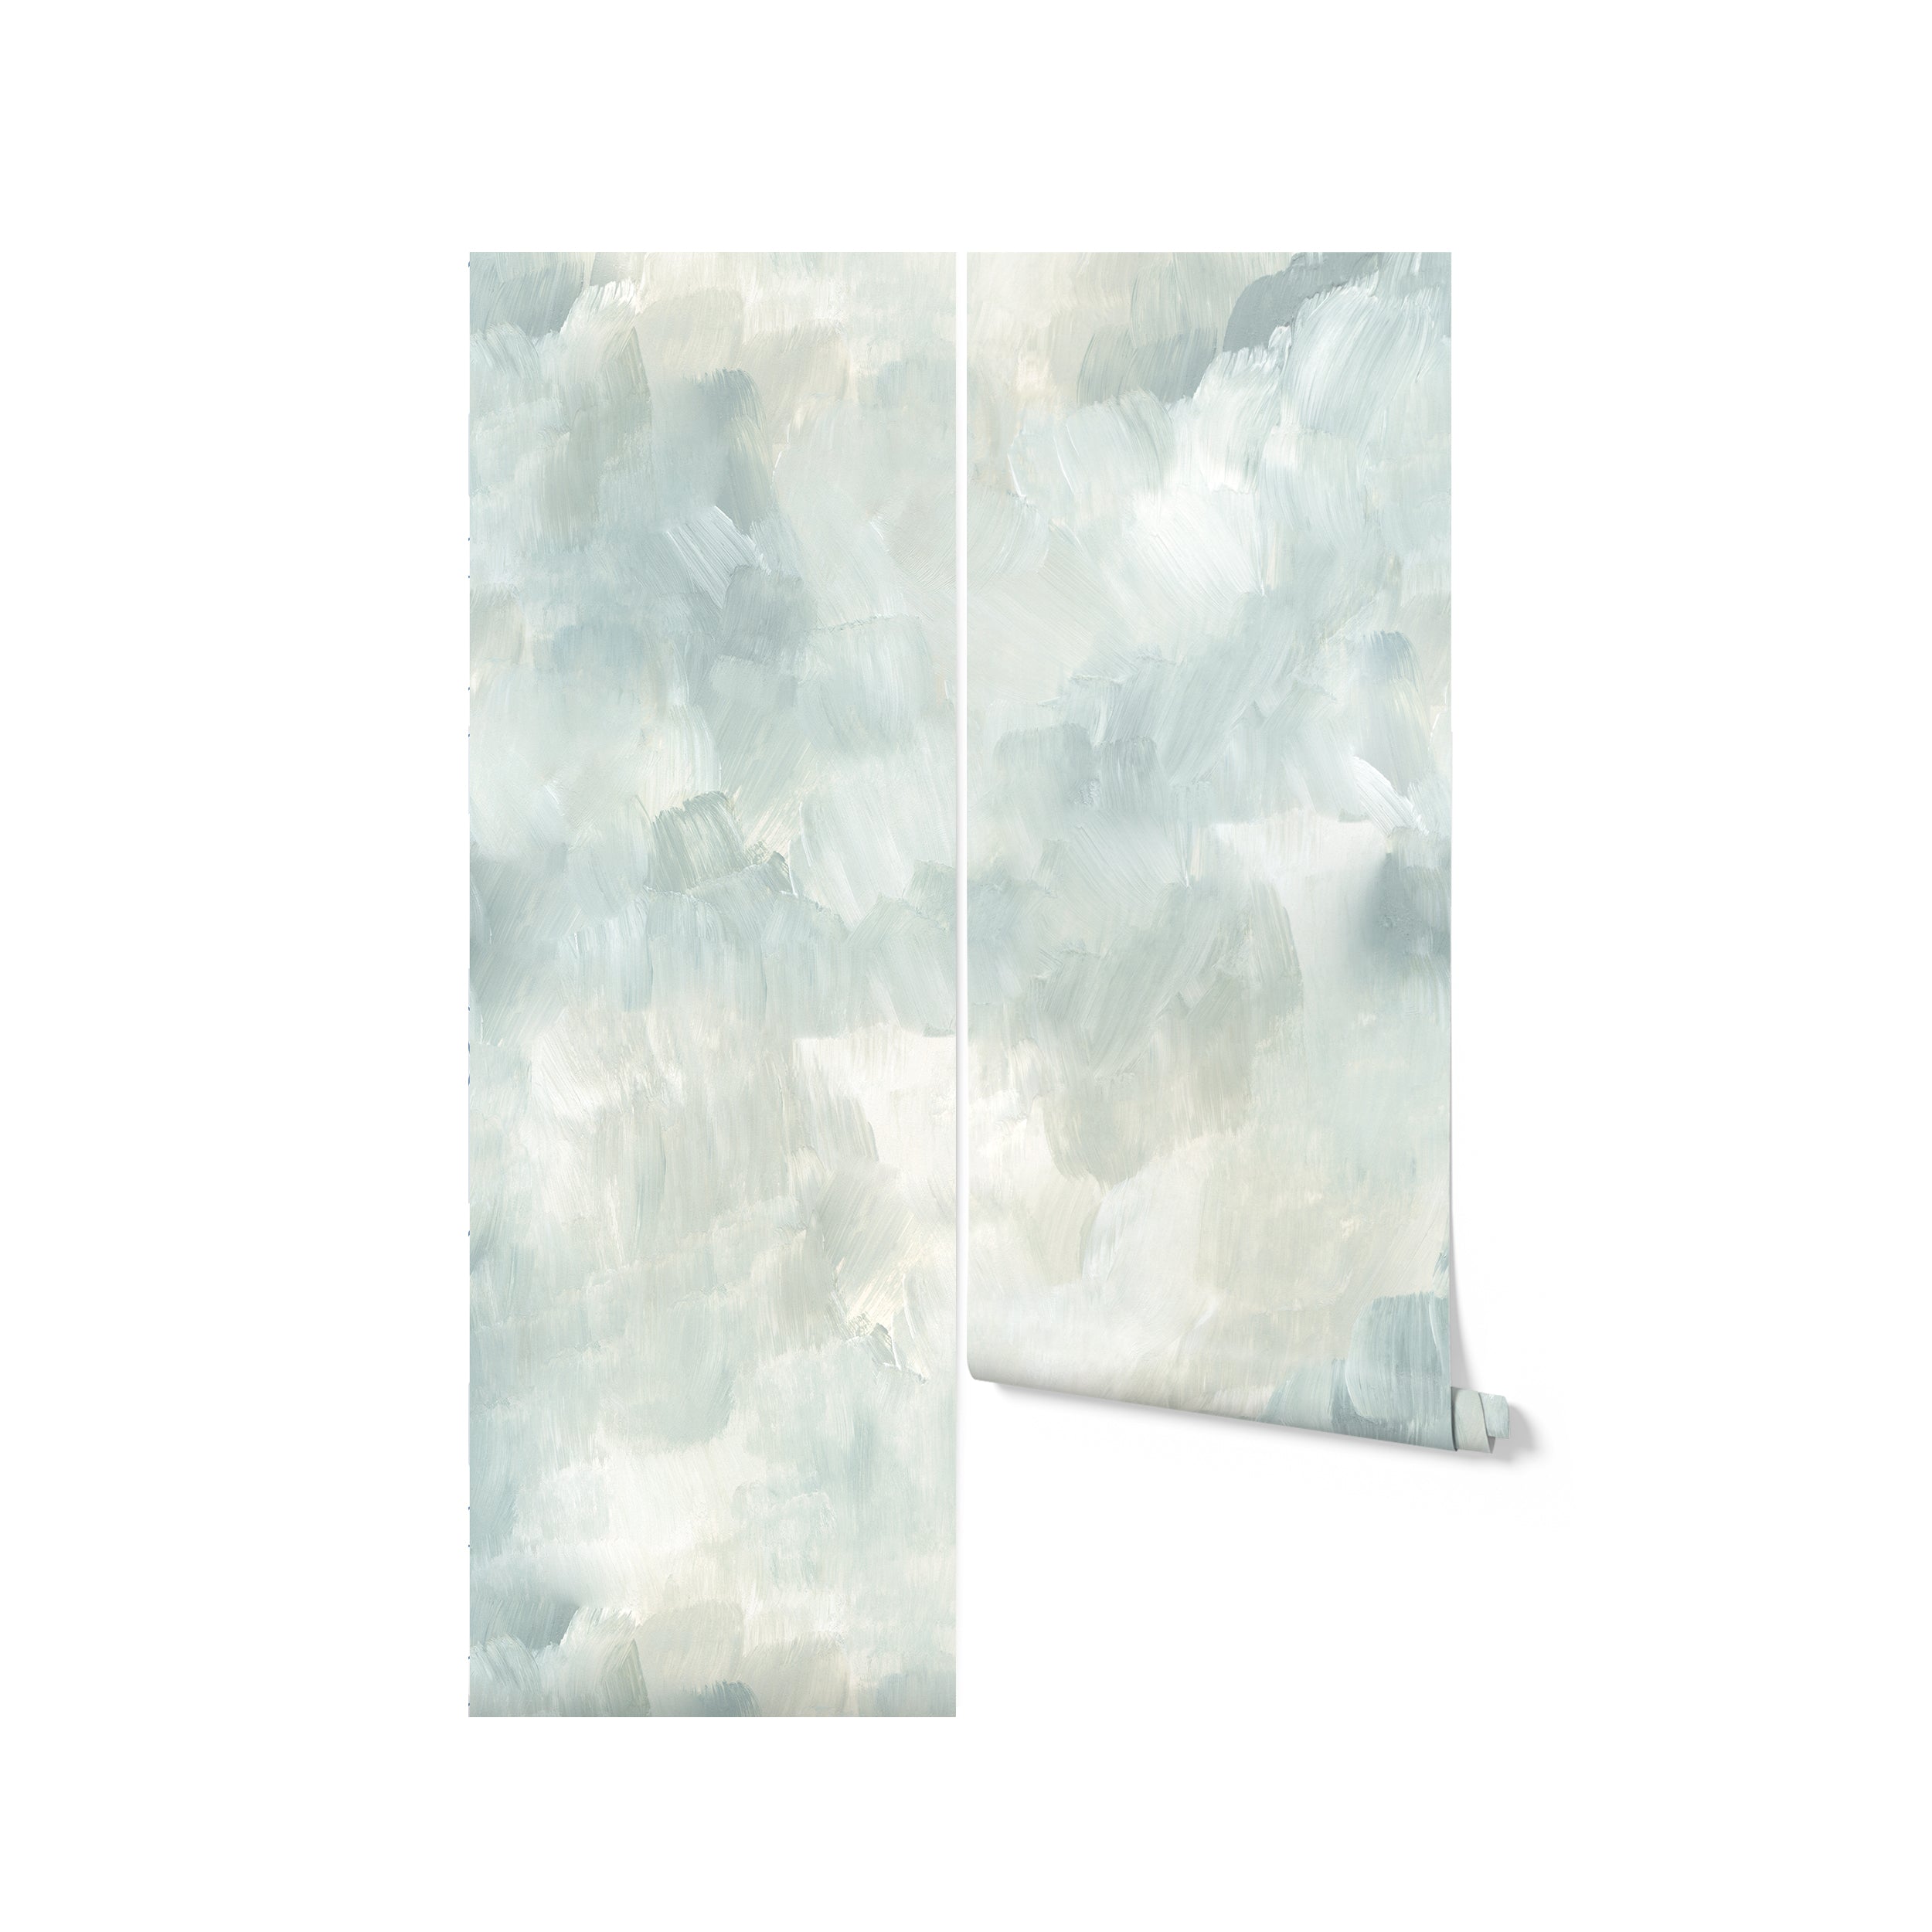 A roll of light blue and white textured wallpaper with a cloud-like pattern. The wallpaper features soft, overlapping brush strokes in different shades of blue and white, creating a calming and serene effect. The roll is partially unrolled to show the pattern.